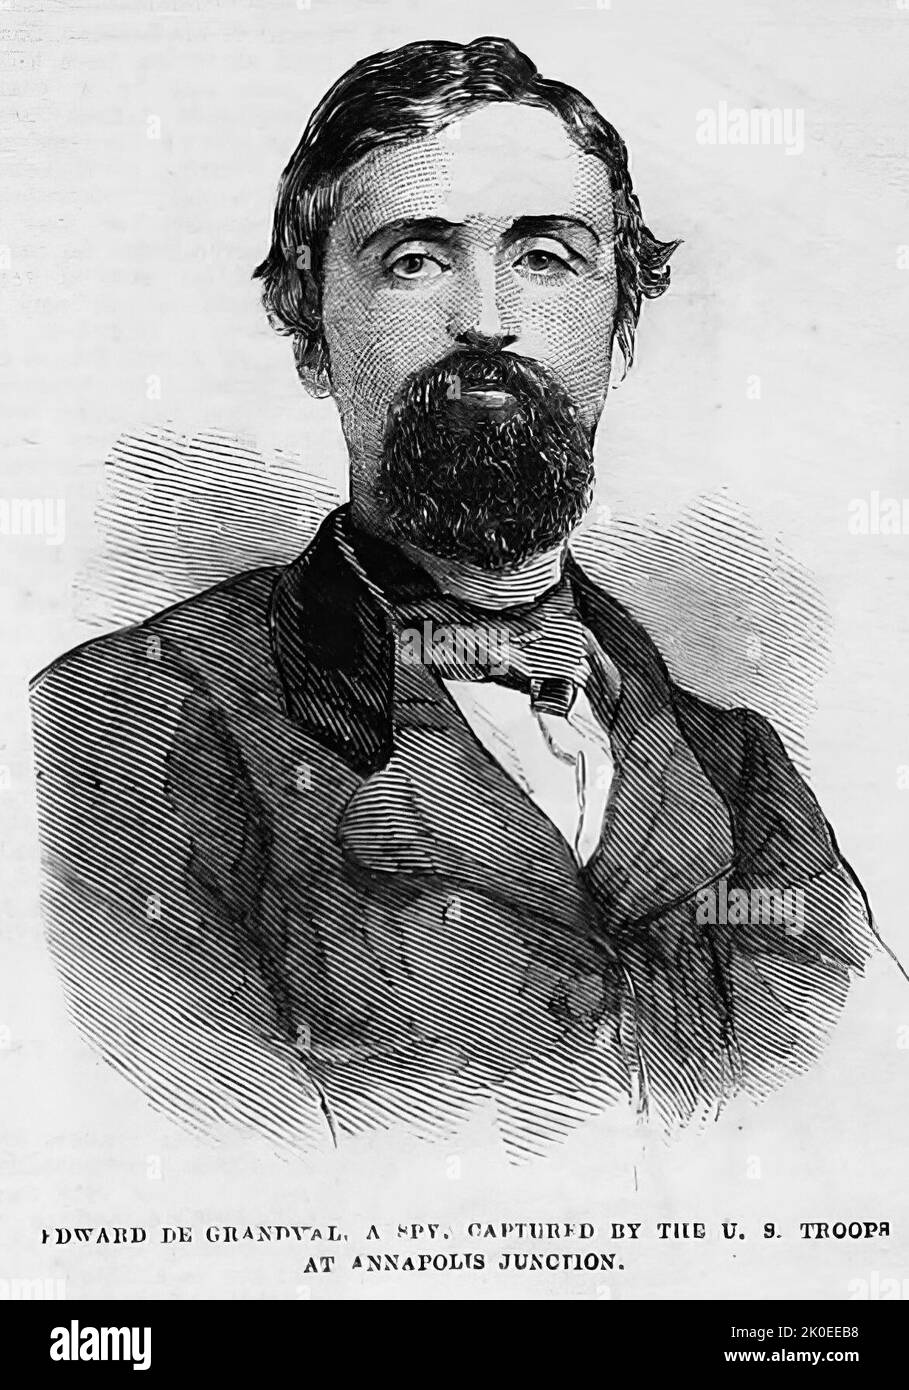 Portrait of Edward de Grandval, a Secessionist spy, captured by the U. S. troops at Annapolis Junction, May 1861. 19th century American Civil War illustration from Frank Leslie's Illustrated Newspaper Stock Photo